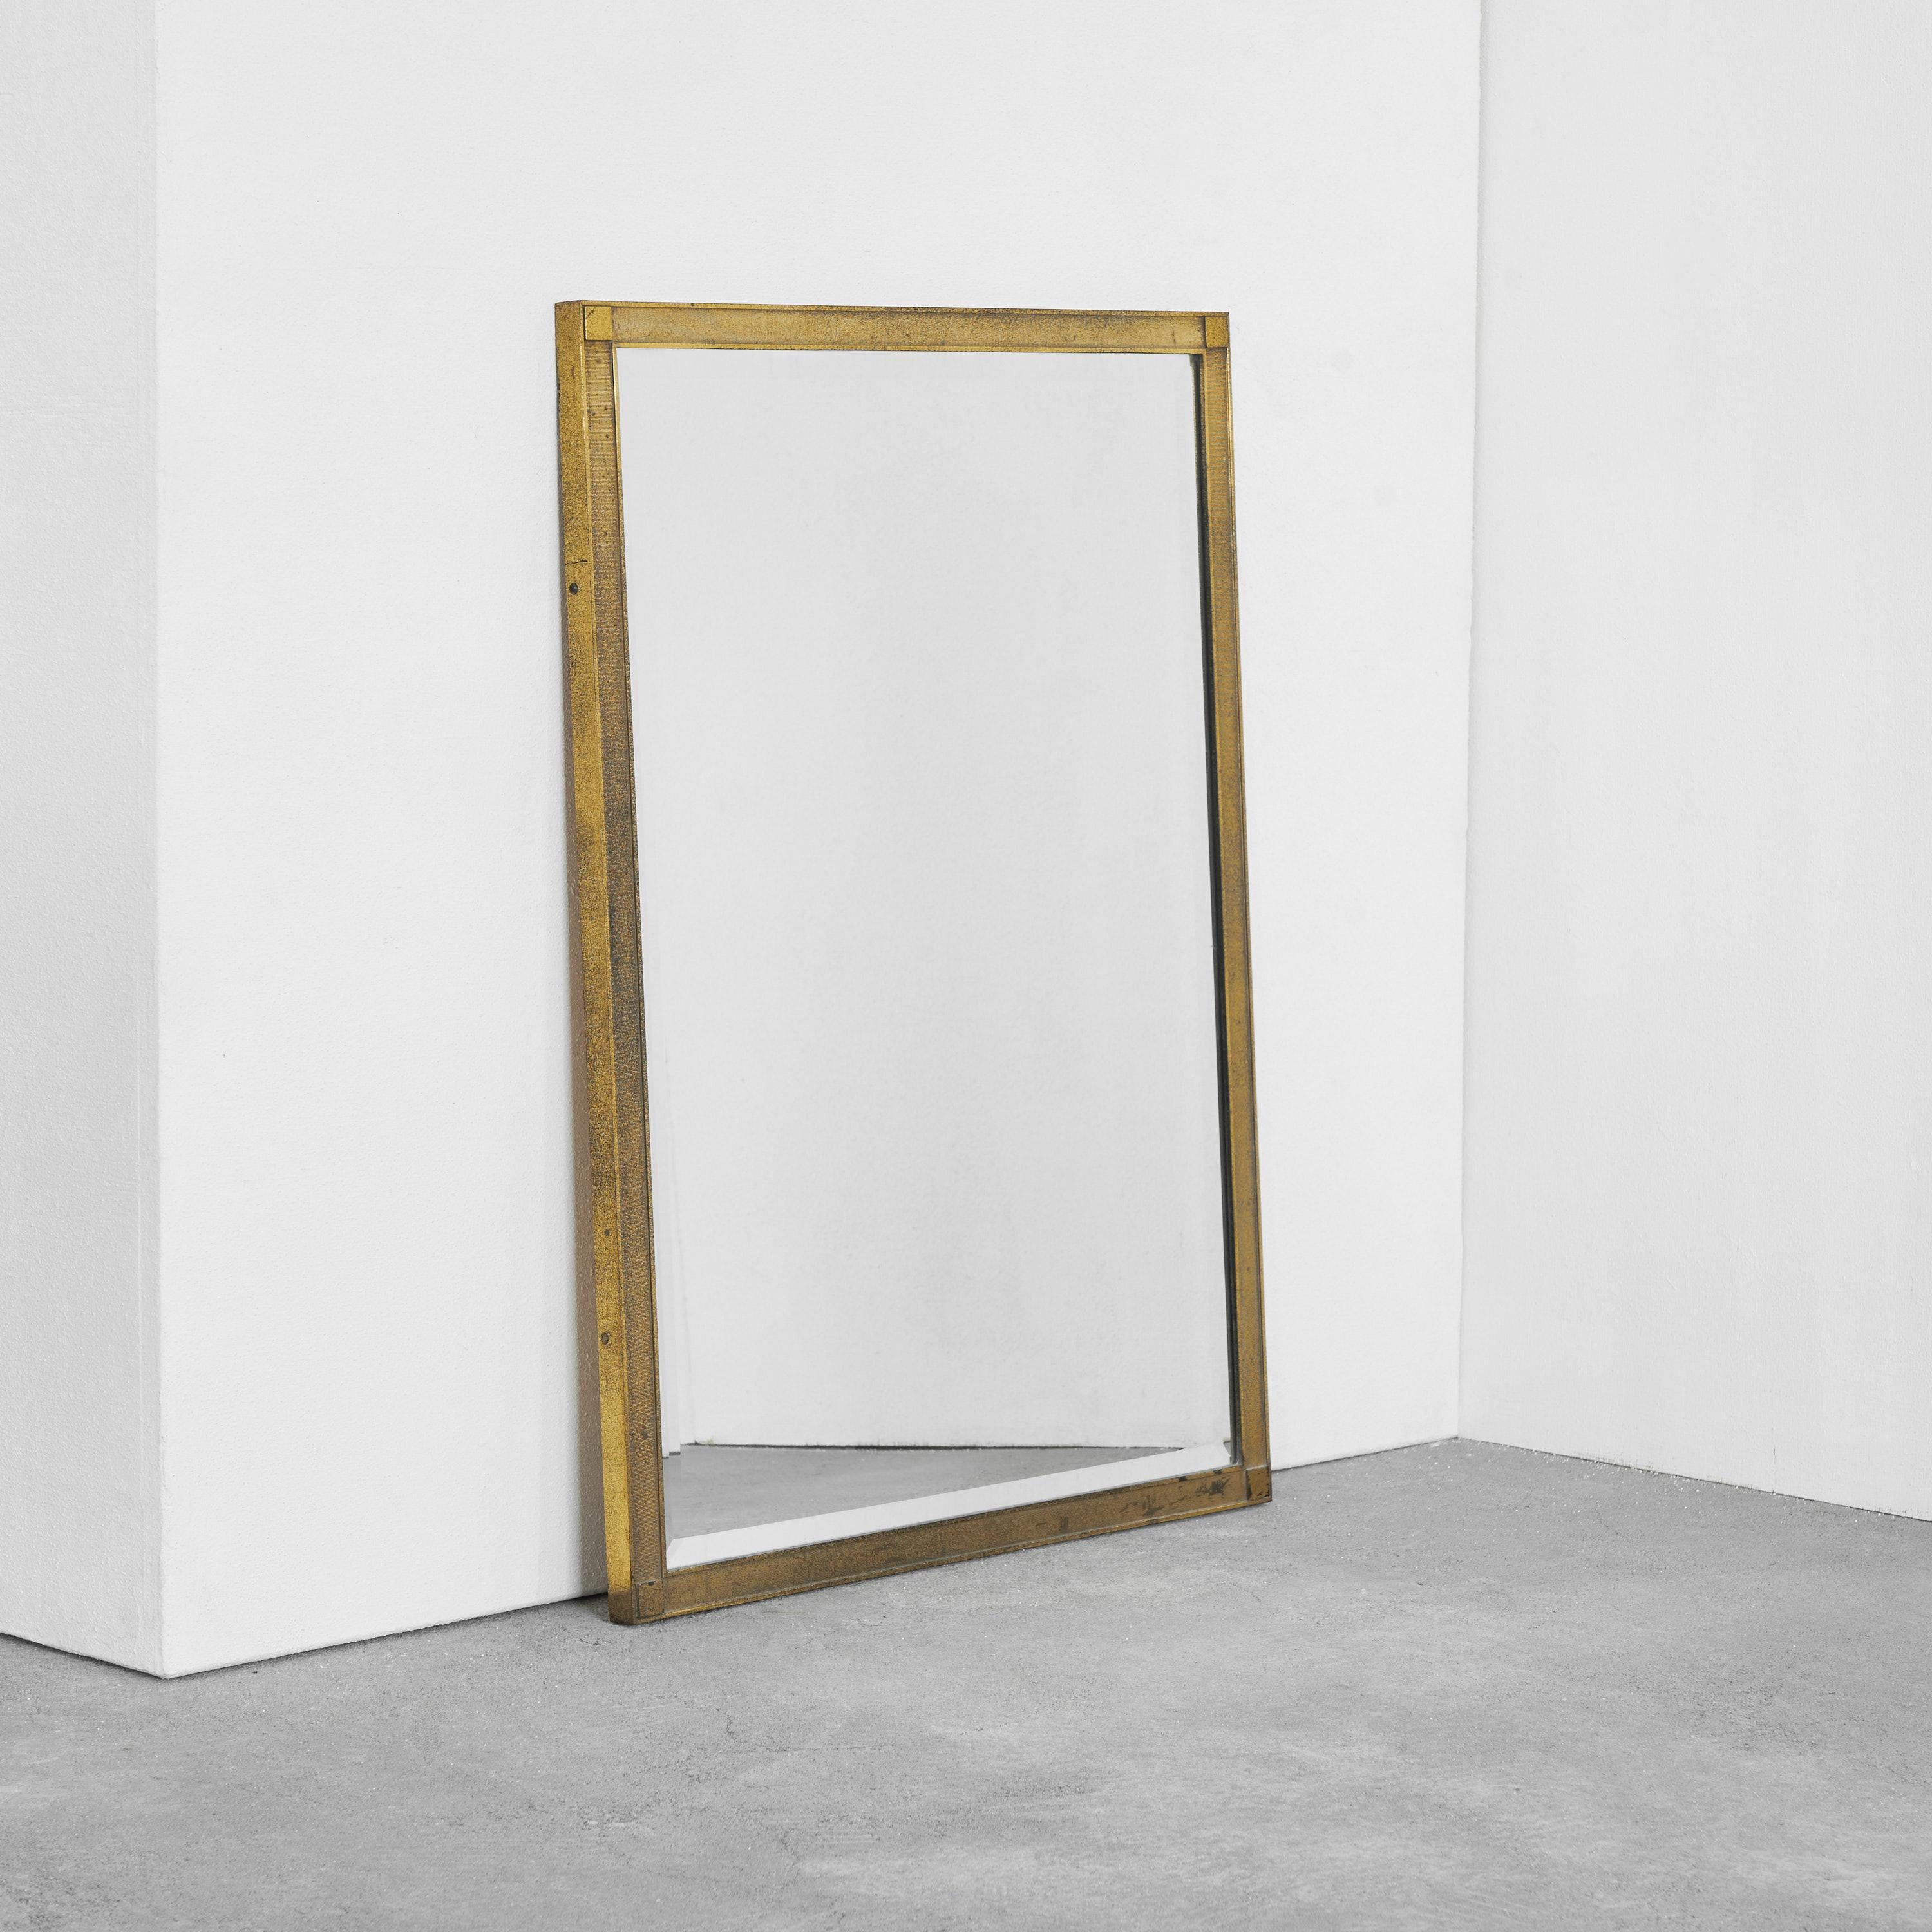 Luxurious Facetted mirror in Patinated Brass. Europe, 1960s.

This luxurious rectangular mirror from the 1960s features a high quality brass frame, showing modest and refined details. A subtle pattern of thin lines can be seen on surface of the